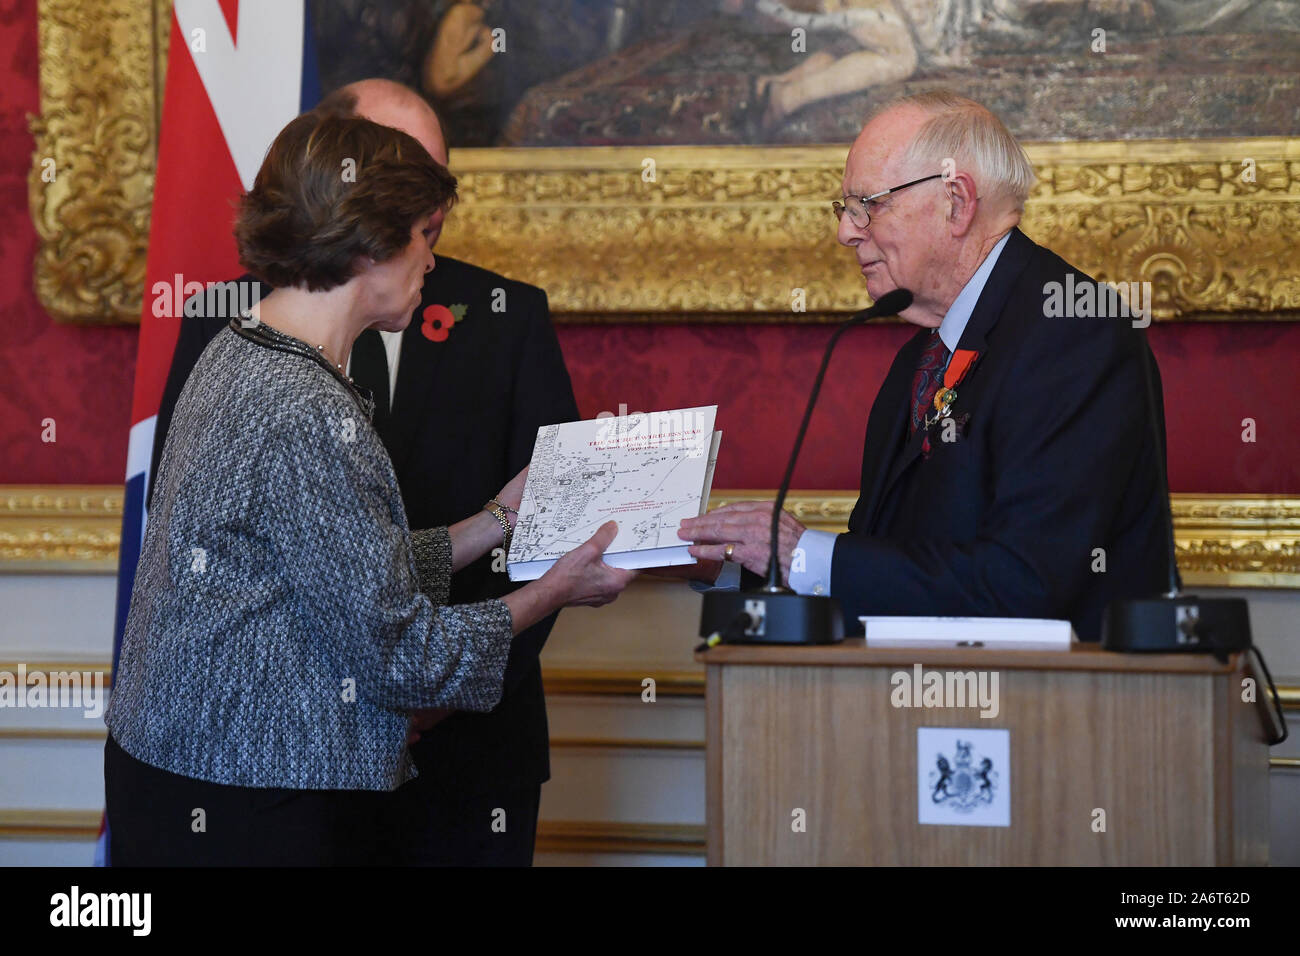 French Ambassador Catherine Colonna receives a gift from World War II veteran Geoffrey Pidgeon, who received the 6000th Legion d'honneur, for his role in the liberation of France during World War II, at a medal ceremony in Lancaster House in London. Stock Photo